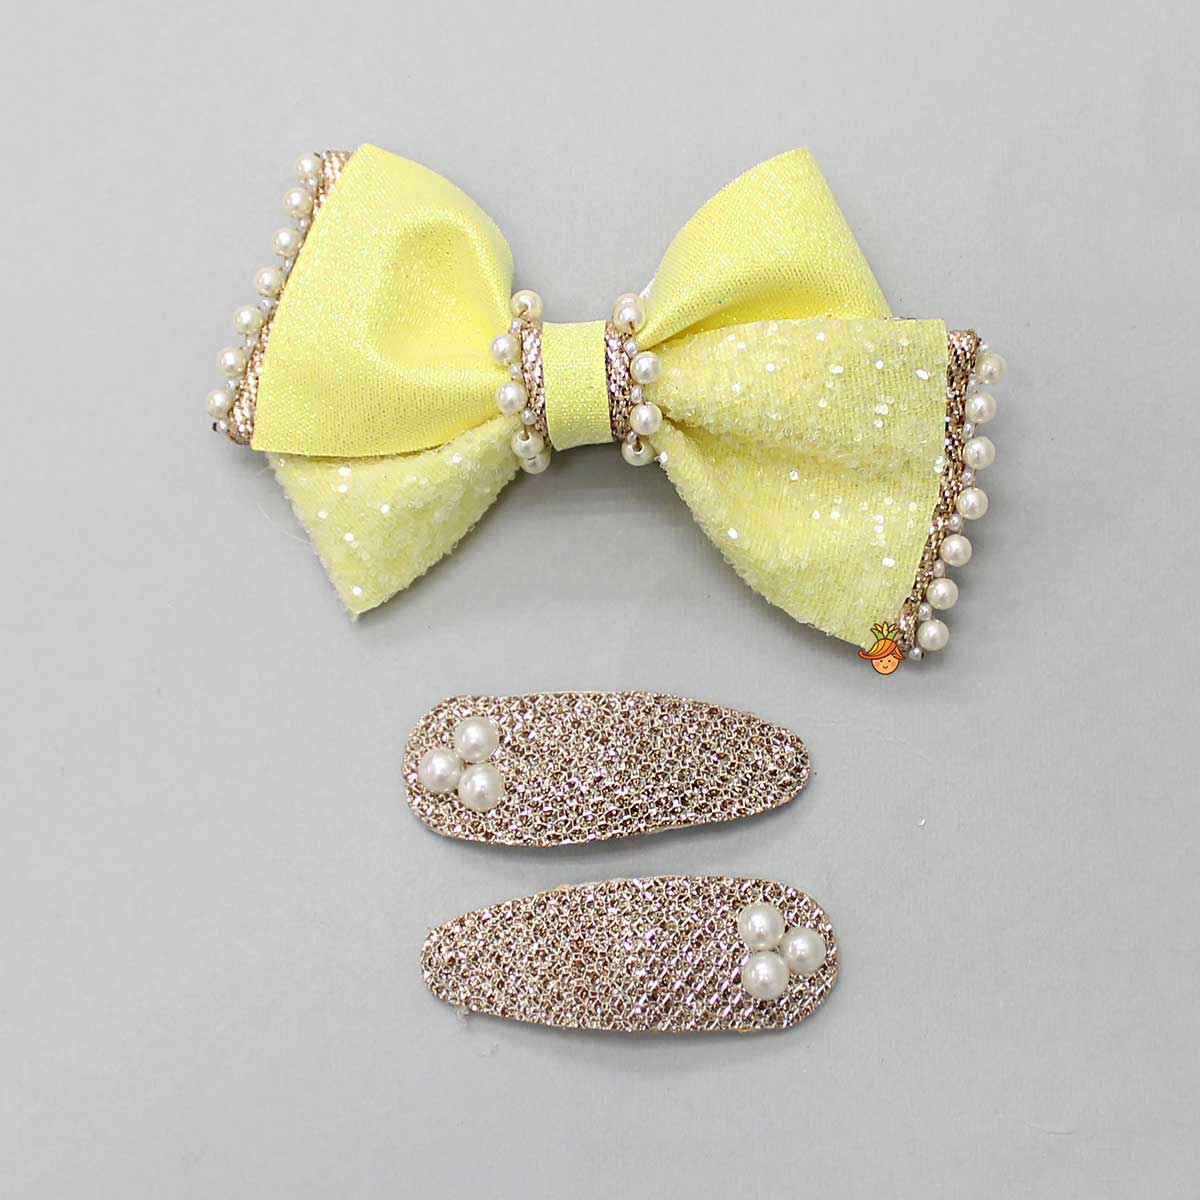 Shimmery Hair Clips With Yellow Bowie Hair Clip